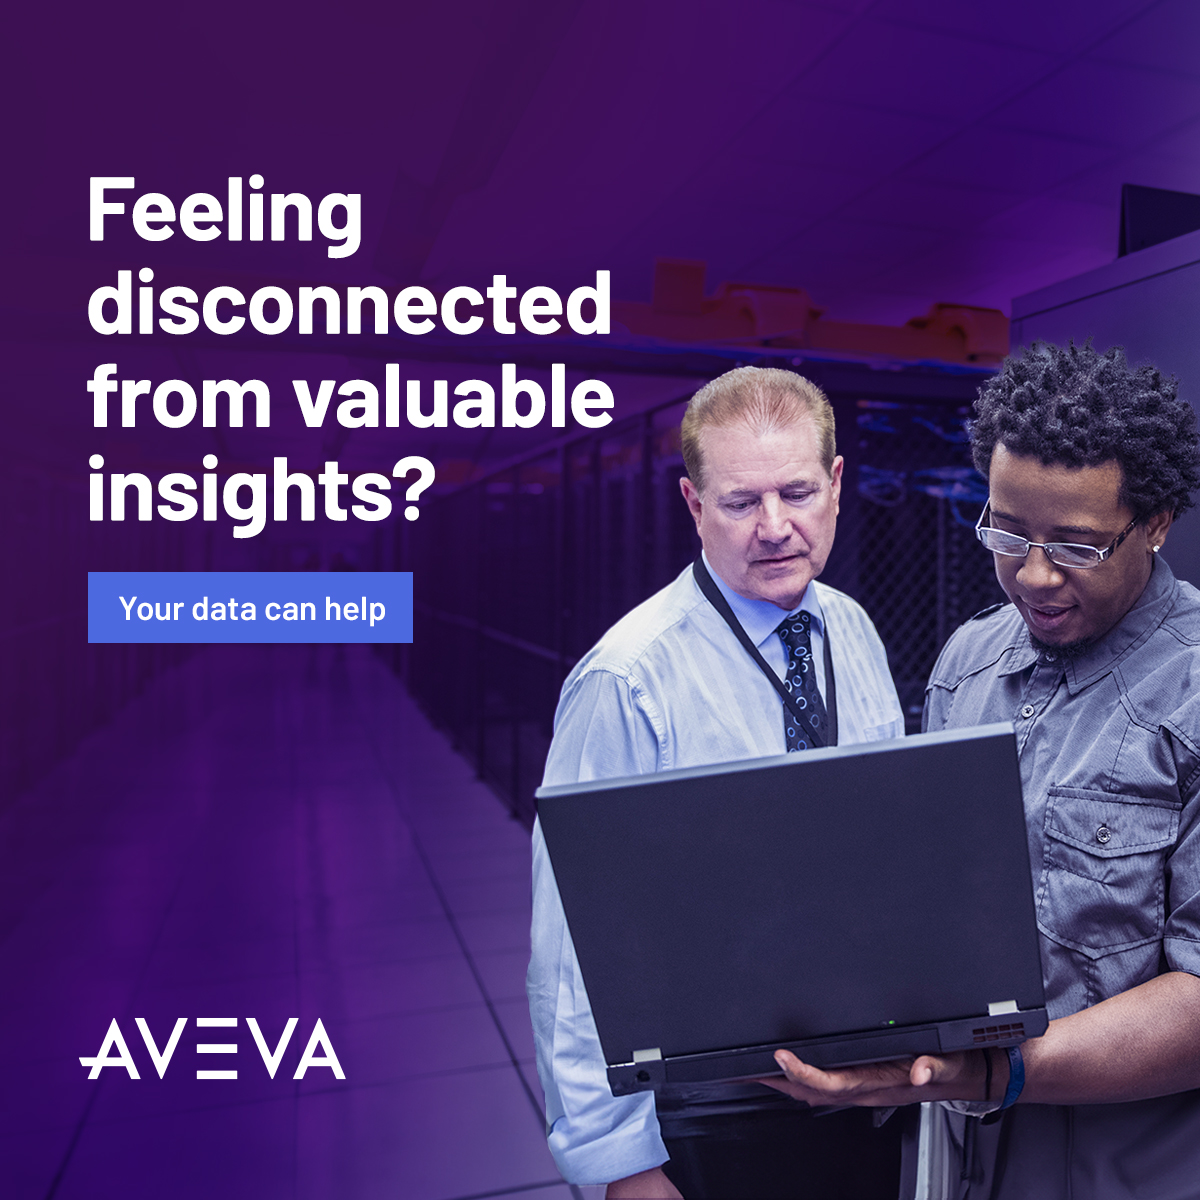 Bridge the gaps in your industrial 🏭 ecosystem and gain a 360° view of your #operations for faster, smarter business decisions.

Learn more about AVEVA Connect’s new features and advanced data services . Read the blog ➡️ bit.ly/3I8XWB6 #cloud #datasharing #AVEVAConnect